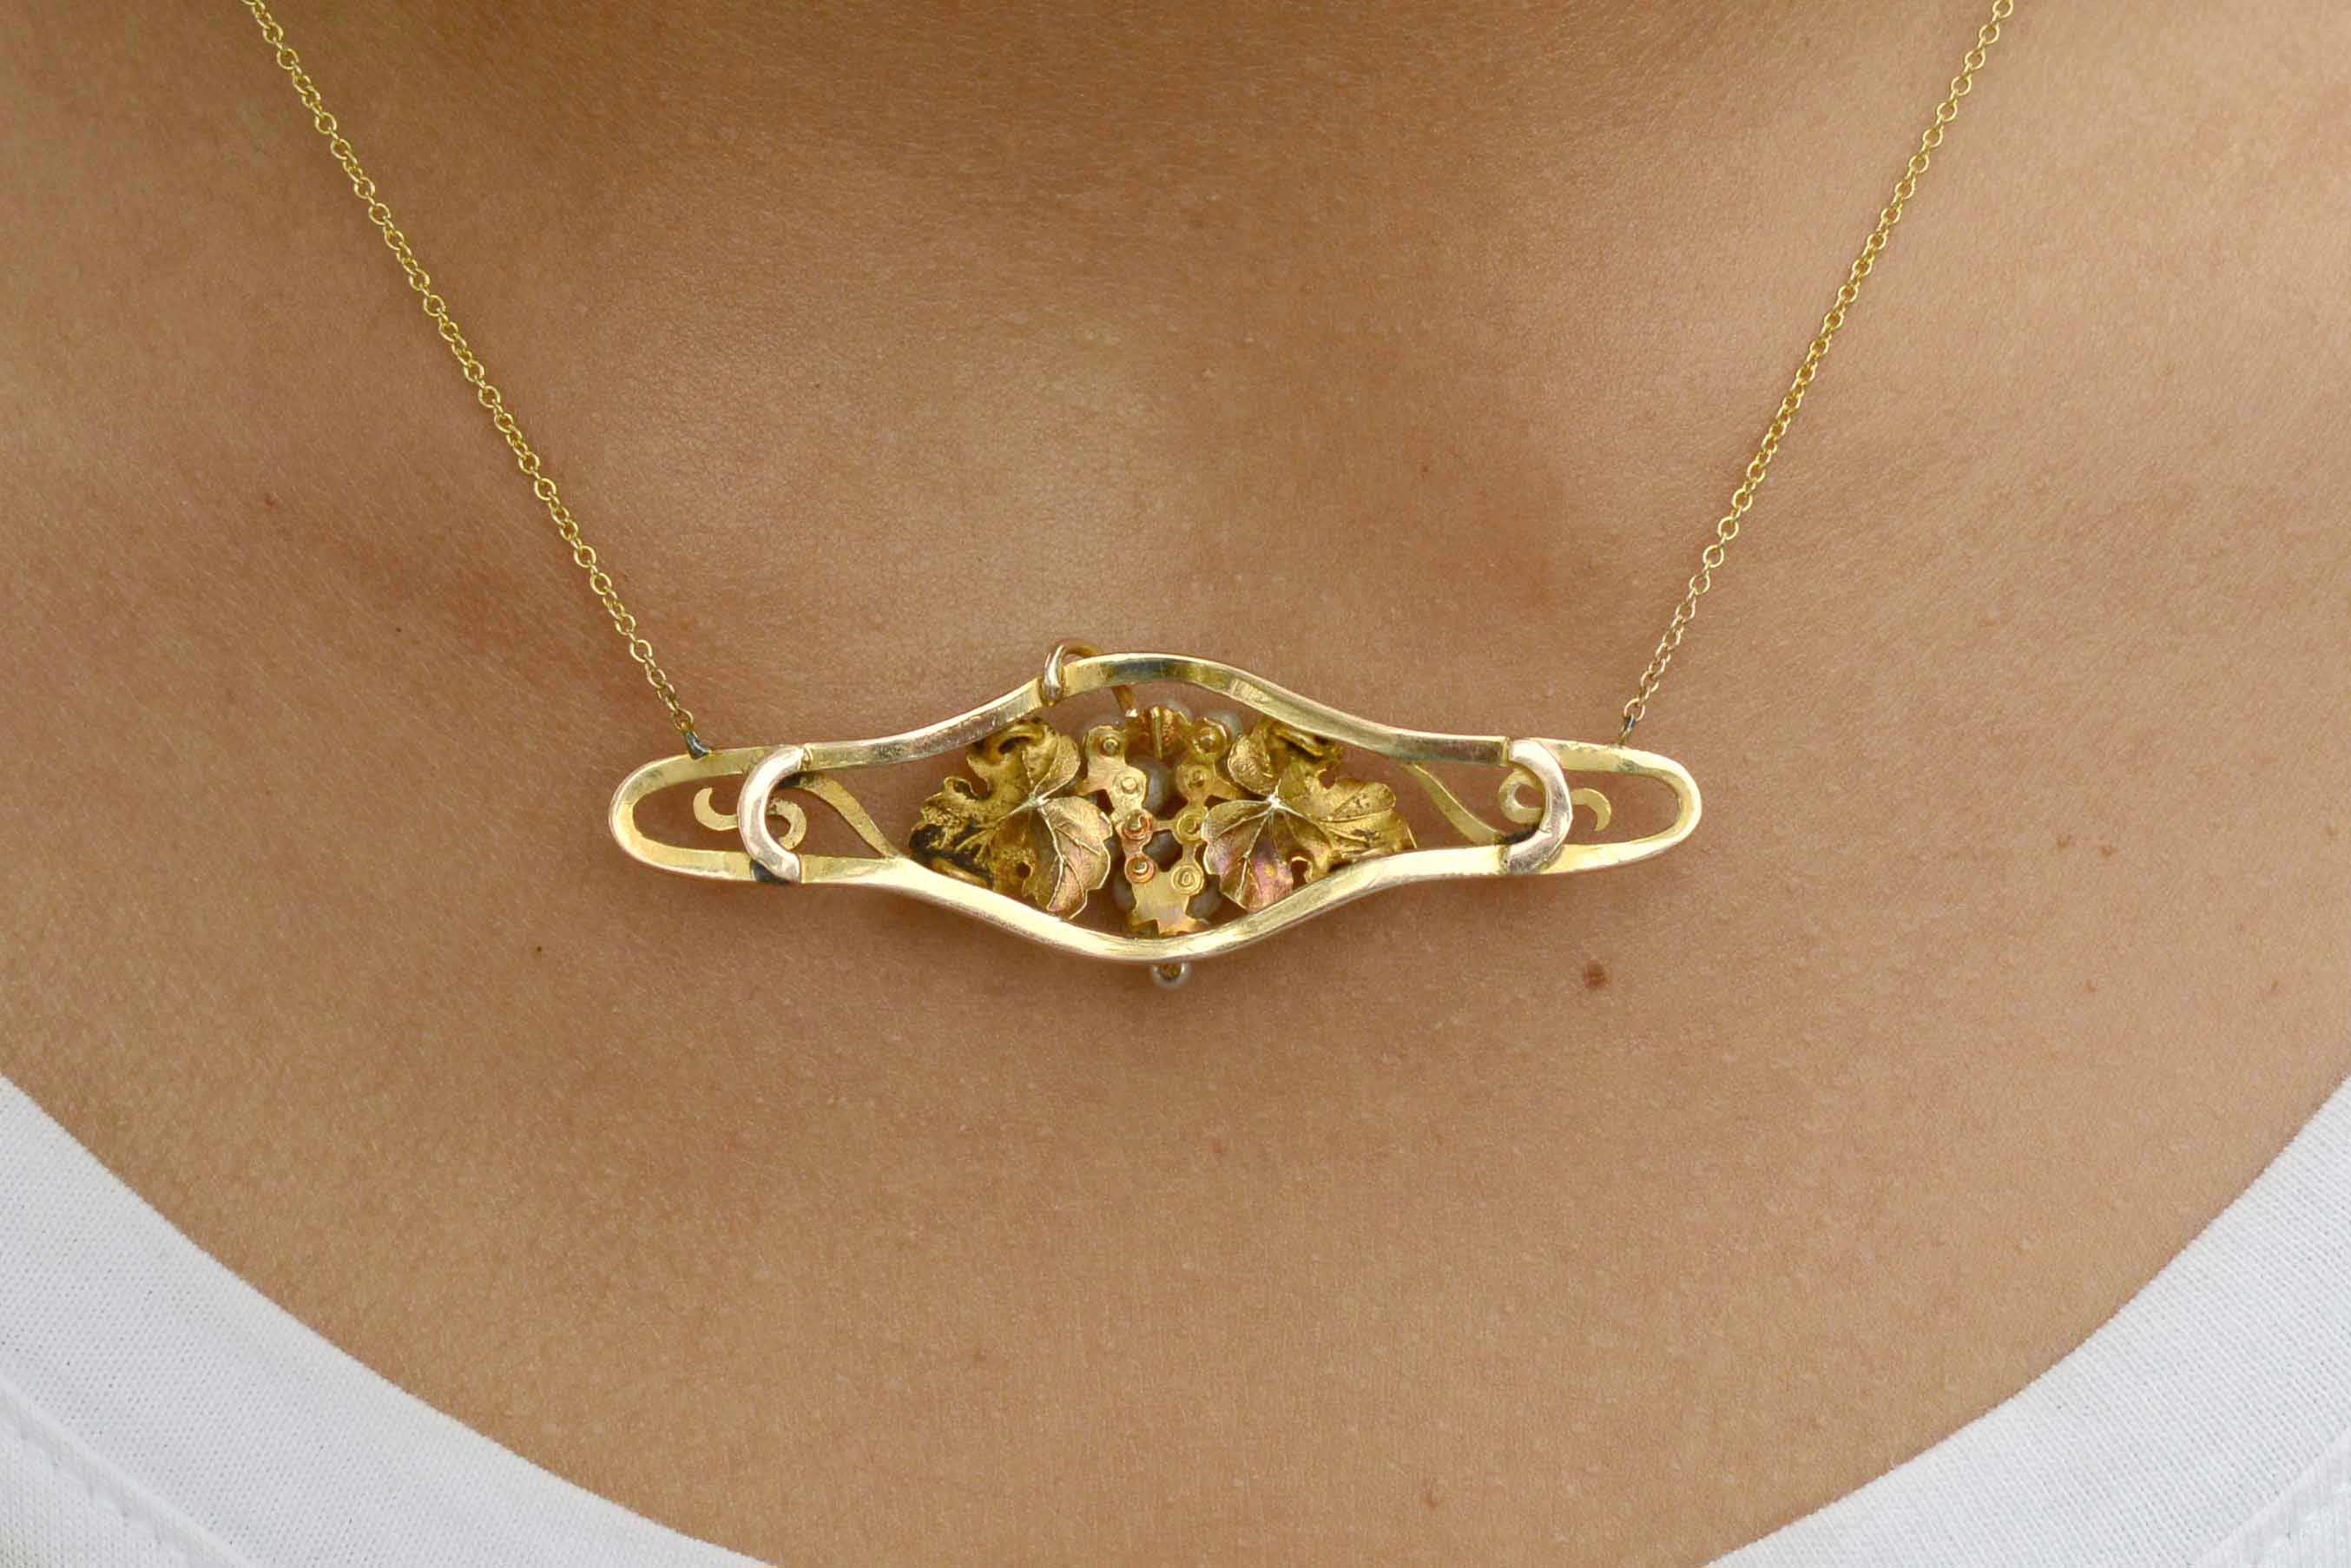 This gold and pearl grape leaf necklace shows great craftsmanship.